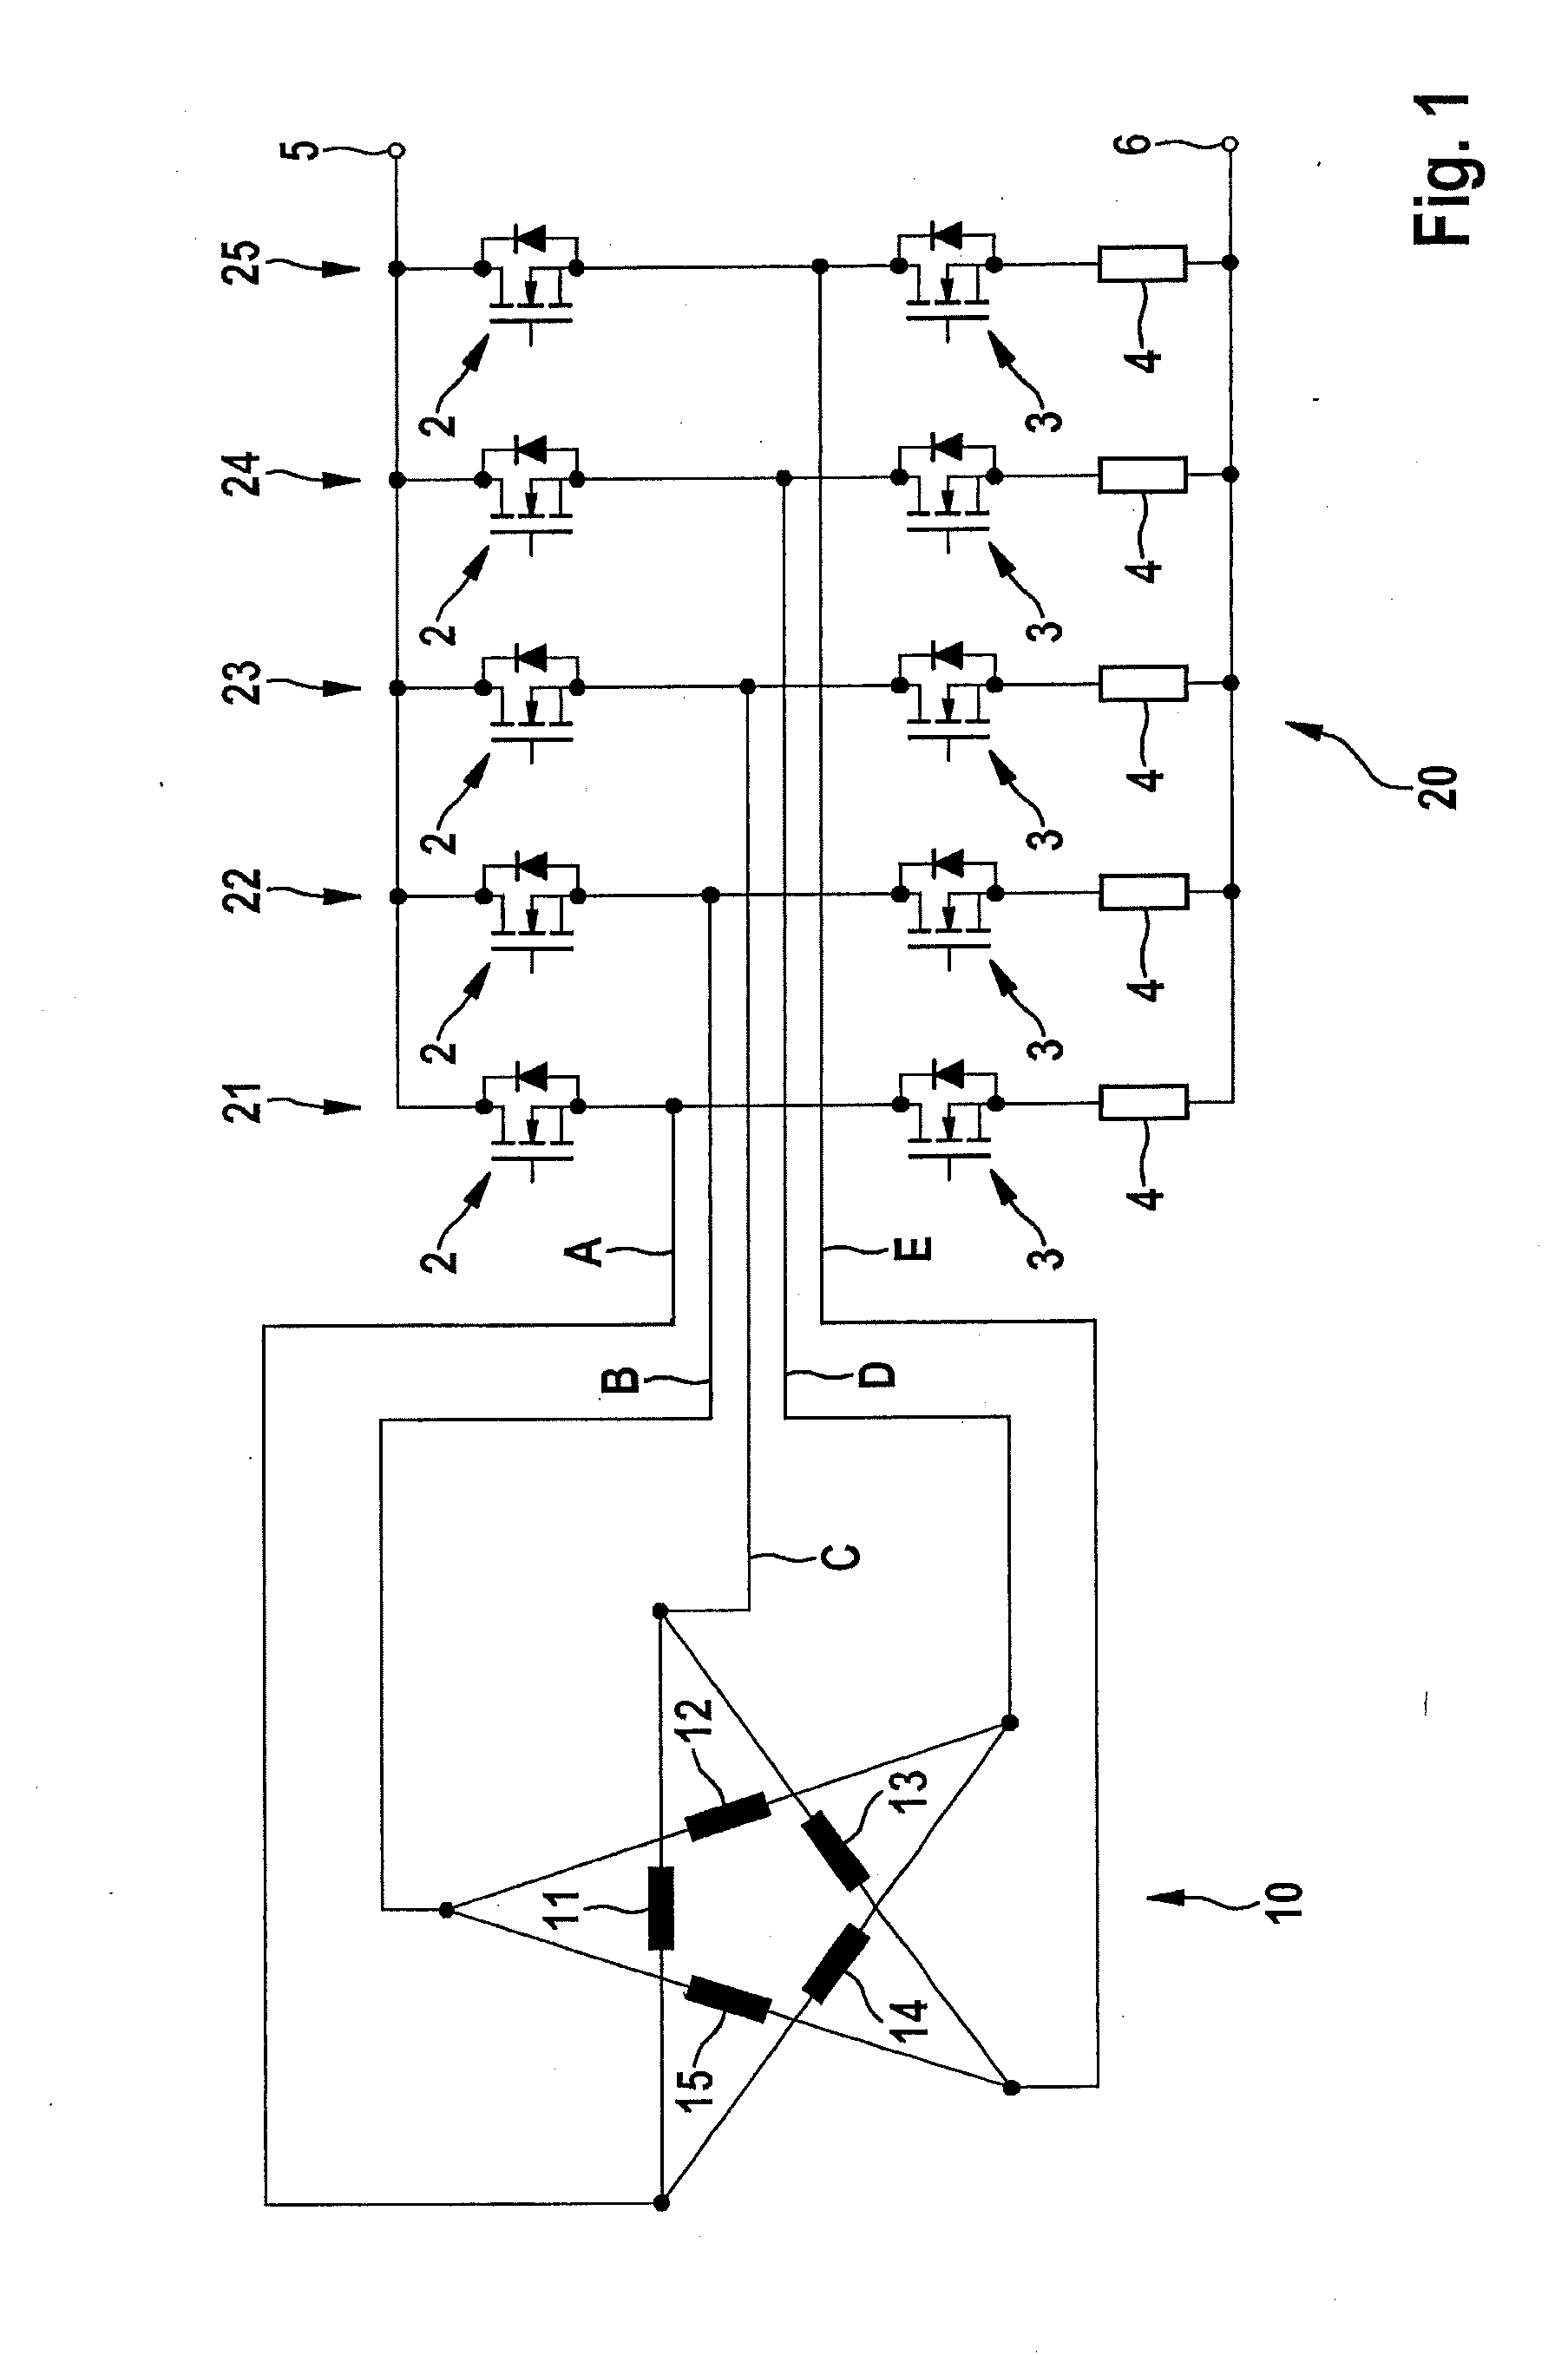 Method for ascertaining the phase currents of an electric machine having a power converter